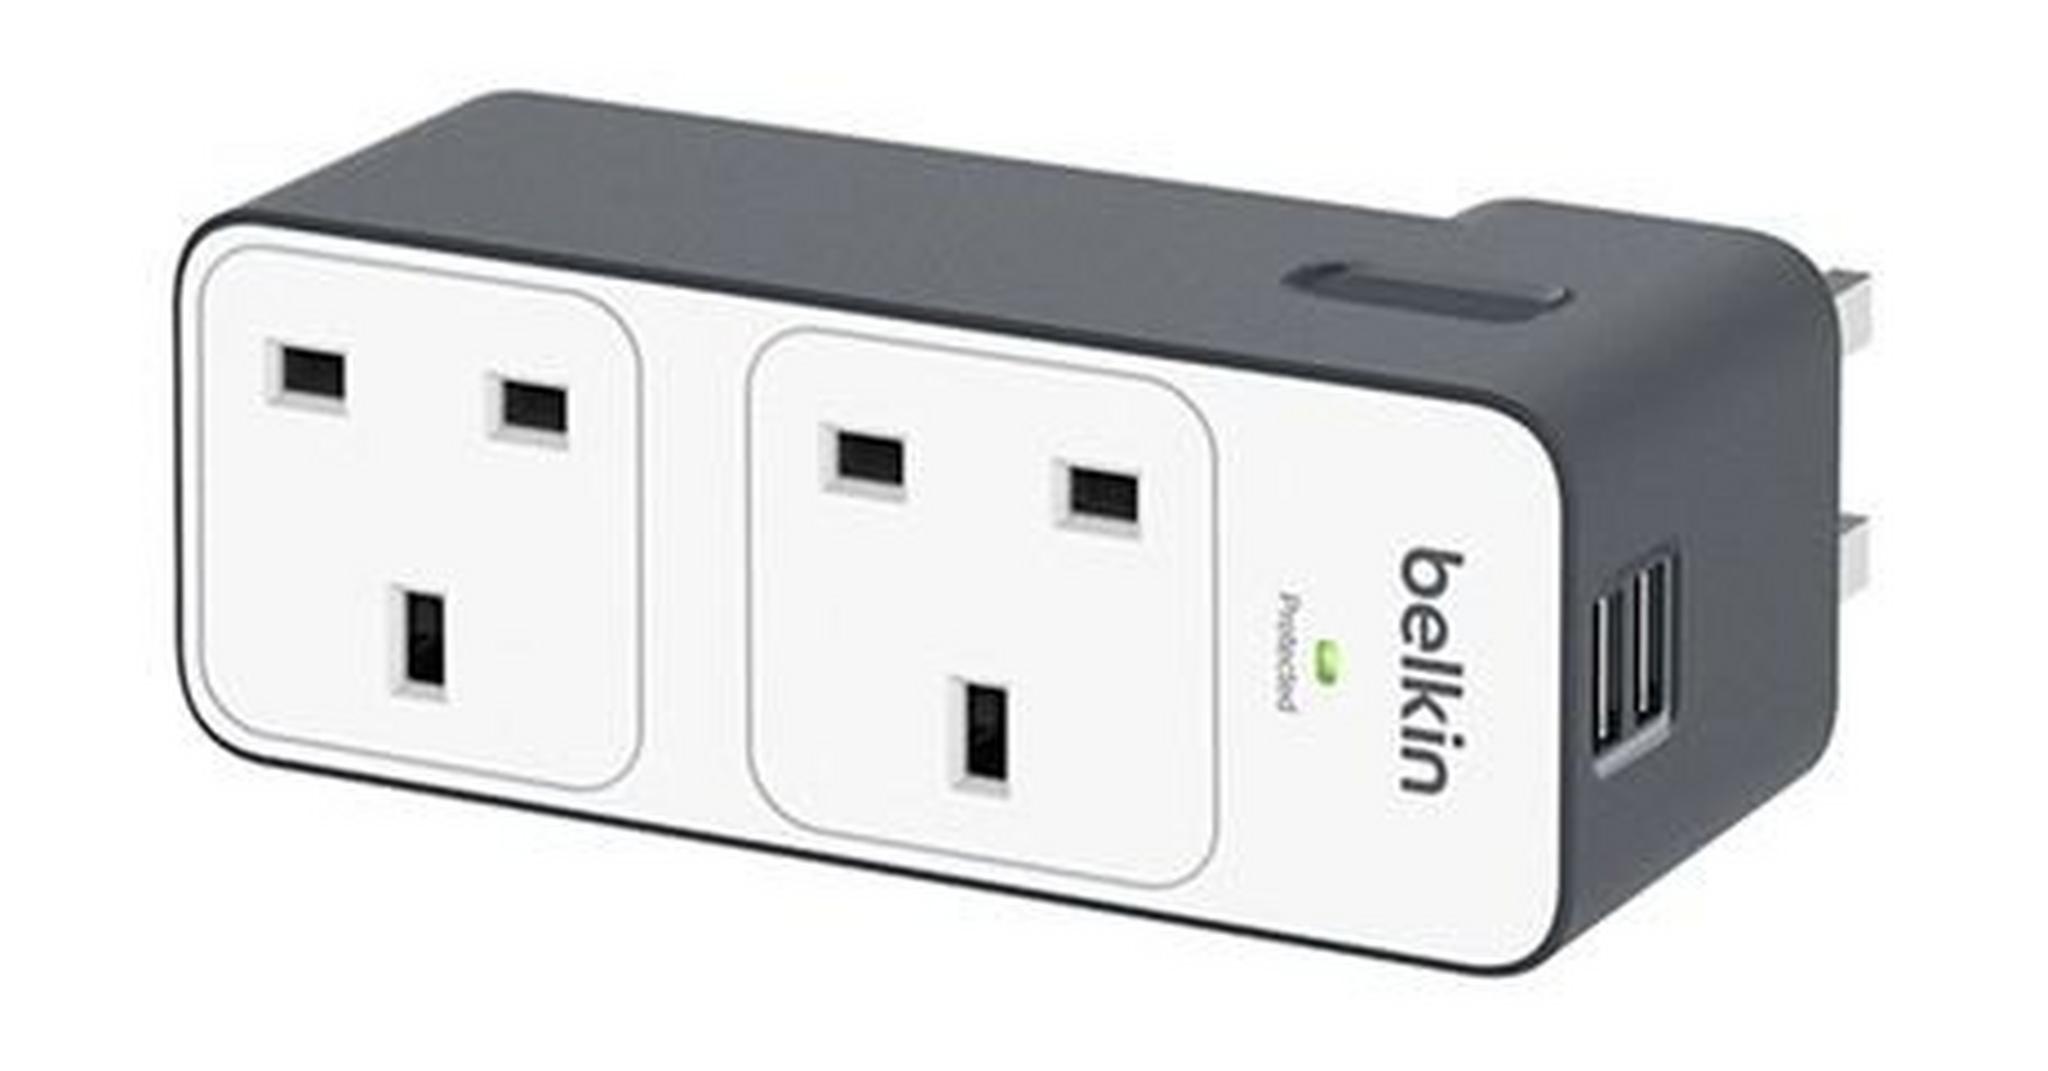 Belkin SurgeCube 2 Outlet Surge Protected Plug/Adapter With 2 USB Charging Ports (BST200af)